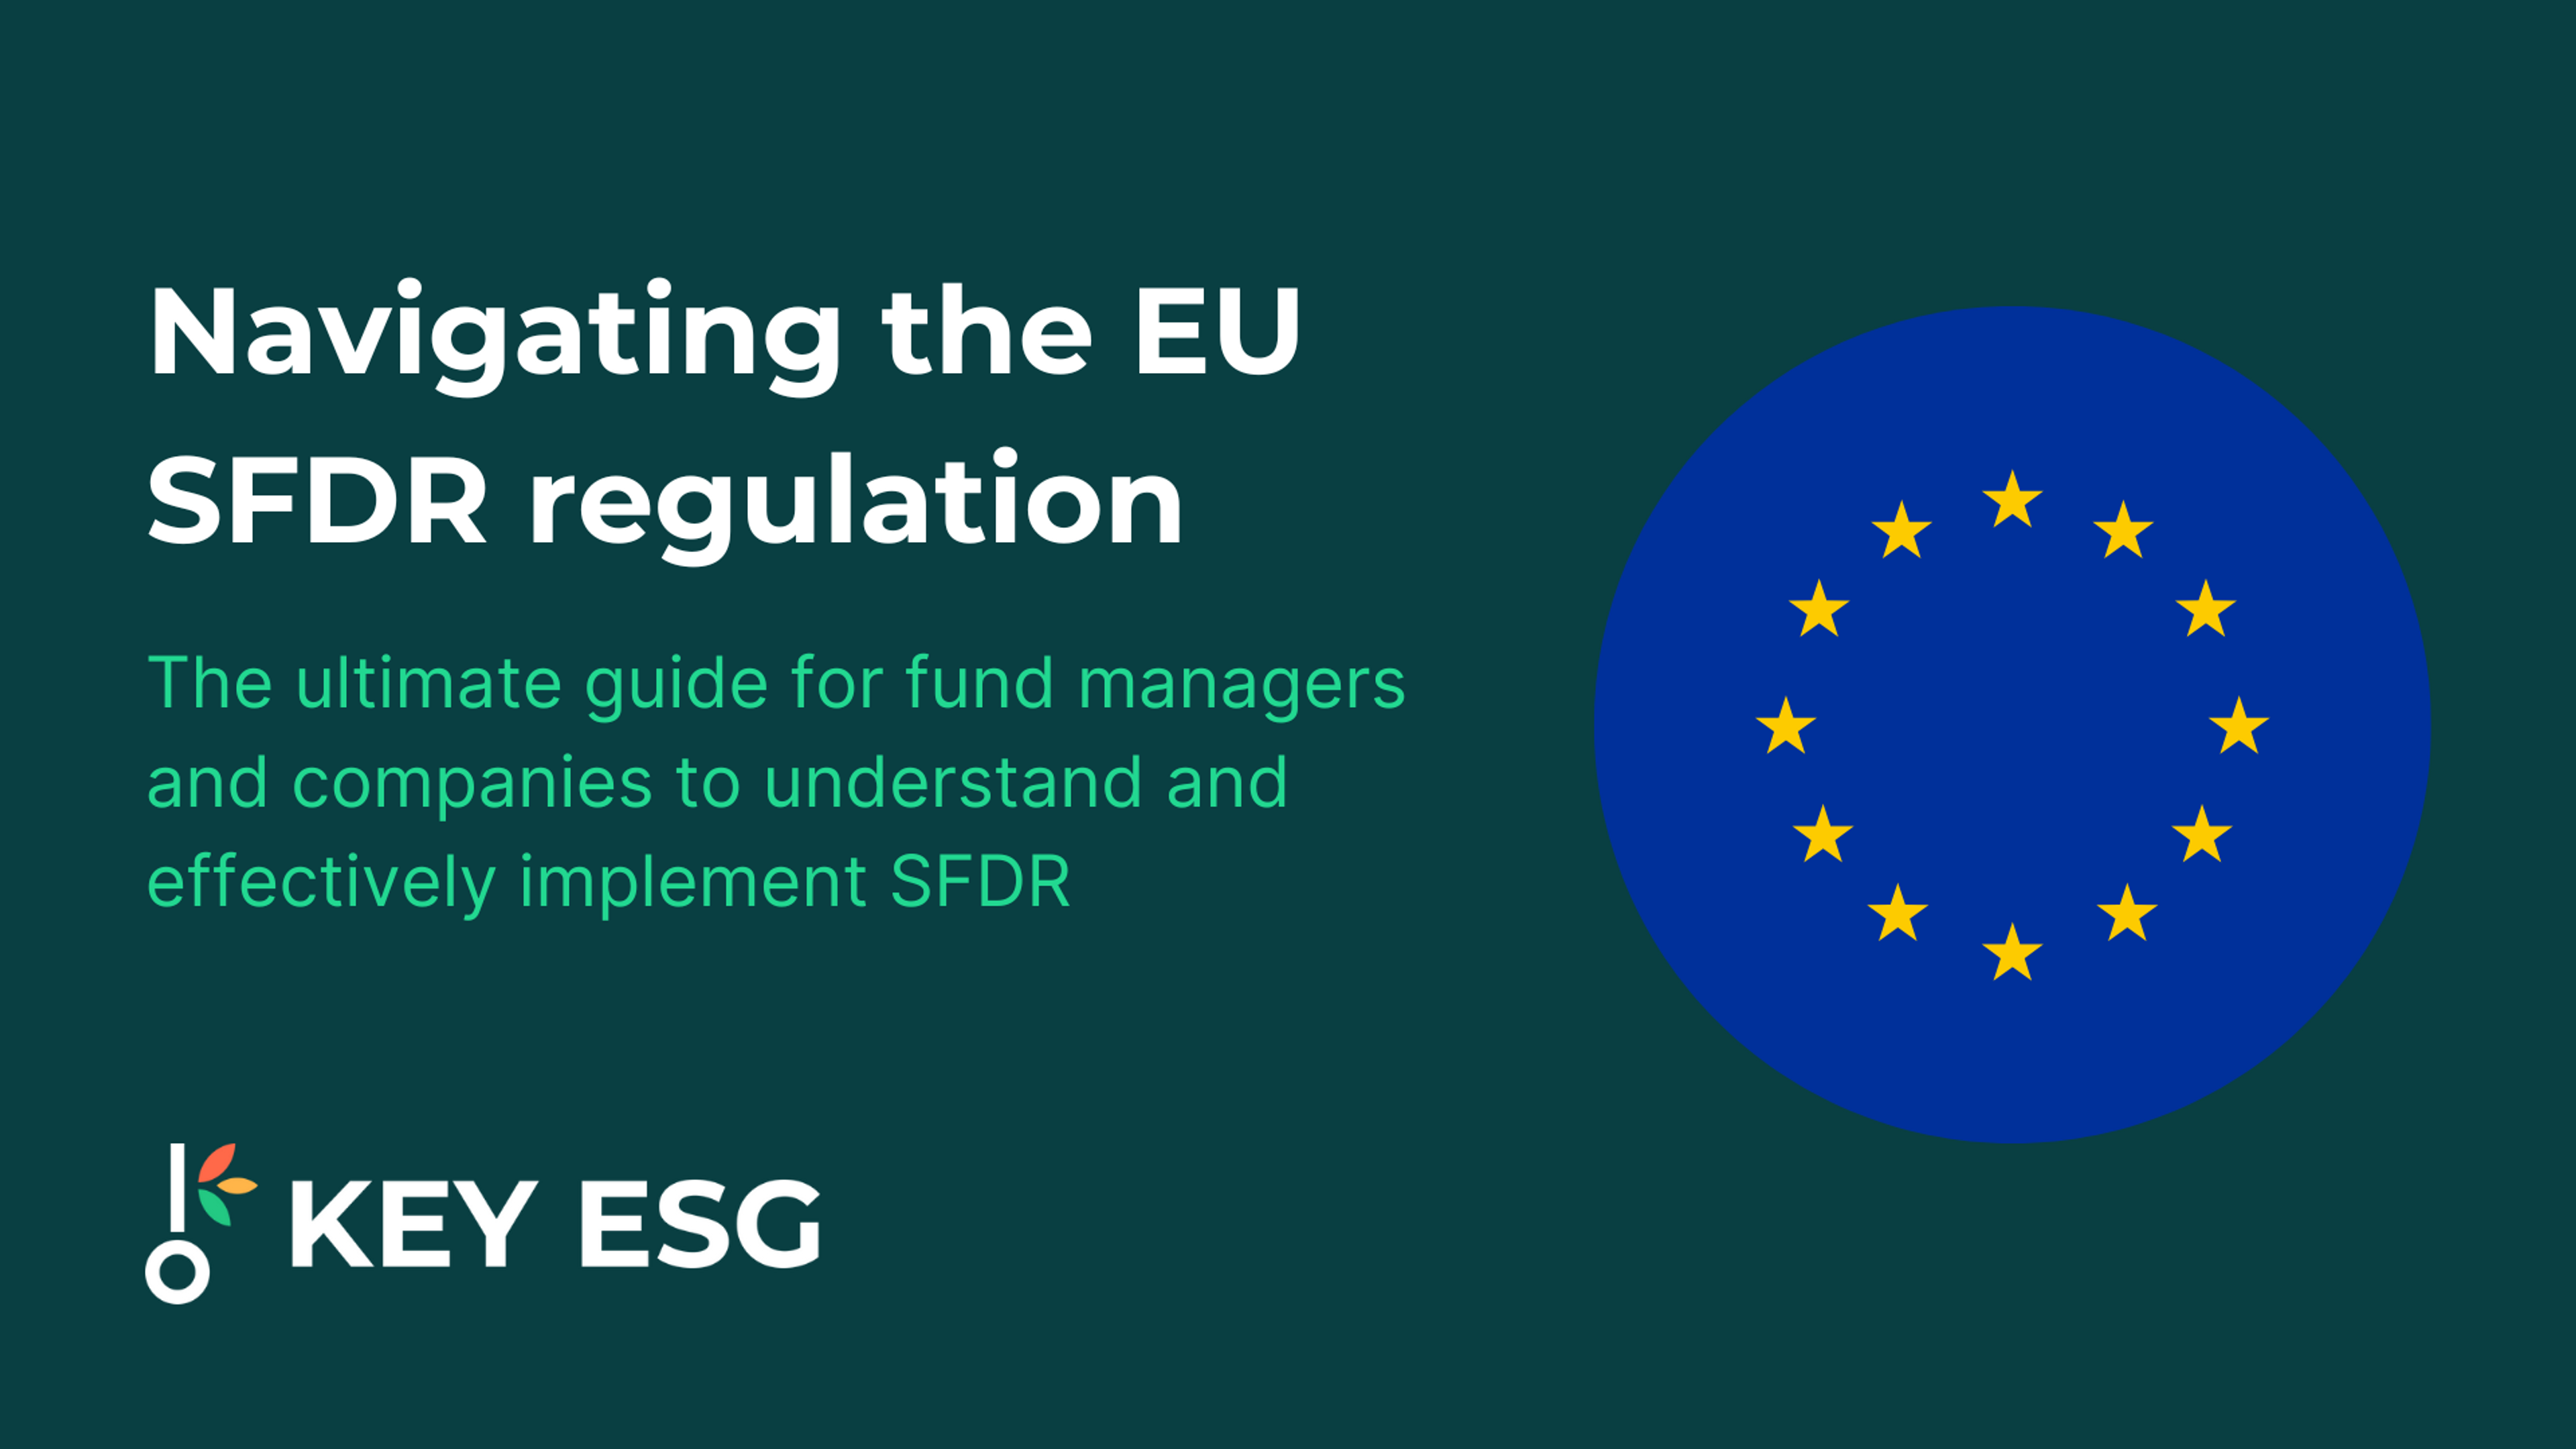 Cover picture of the SFDR whitepaper with an EU flag